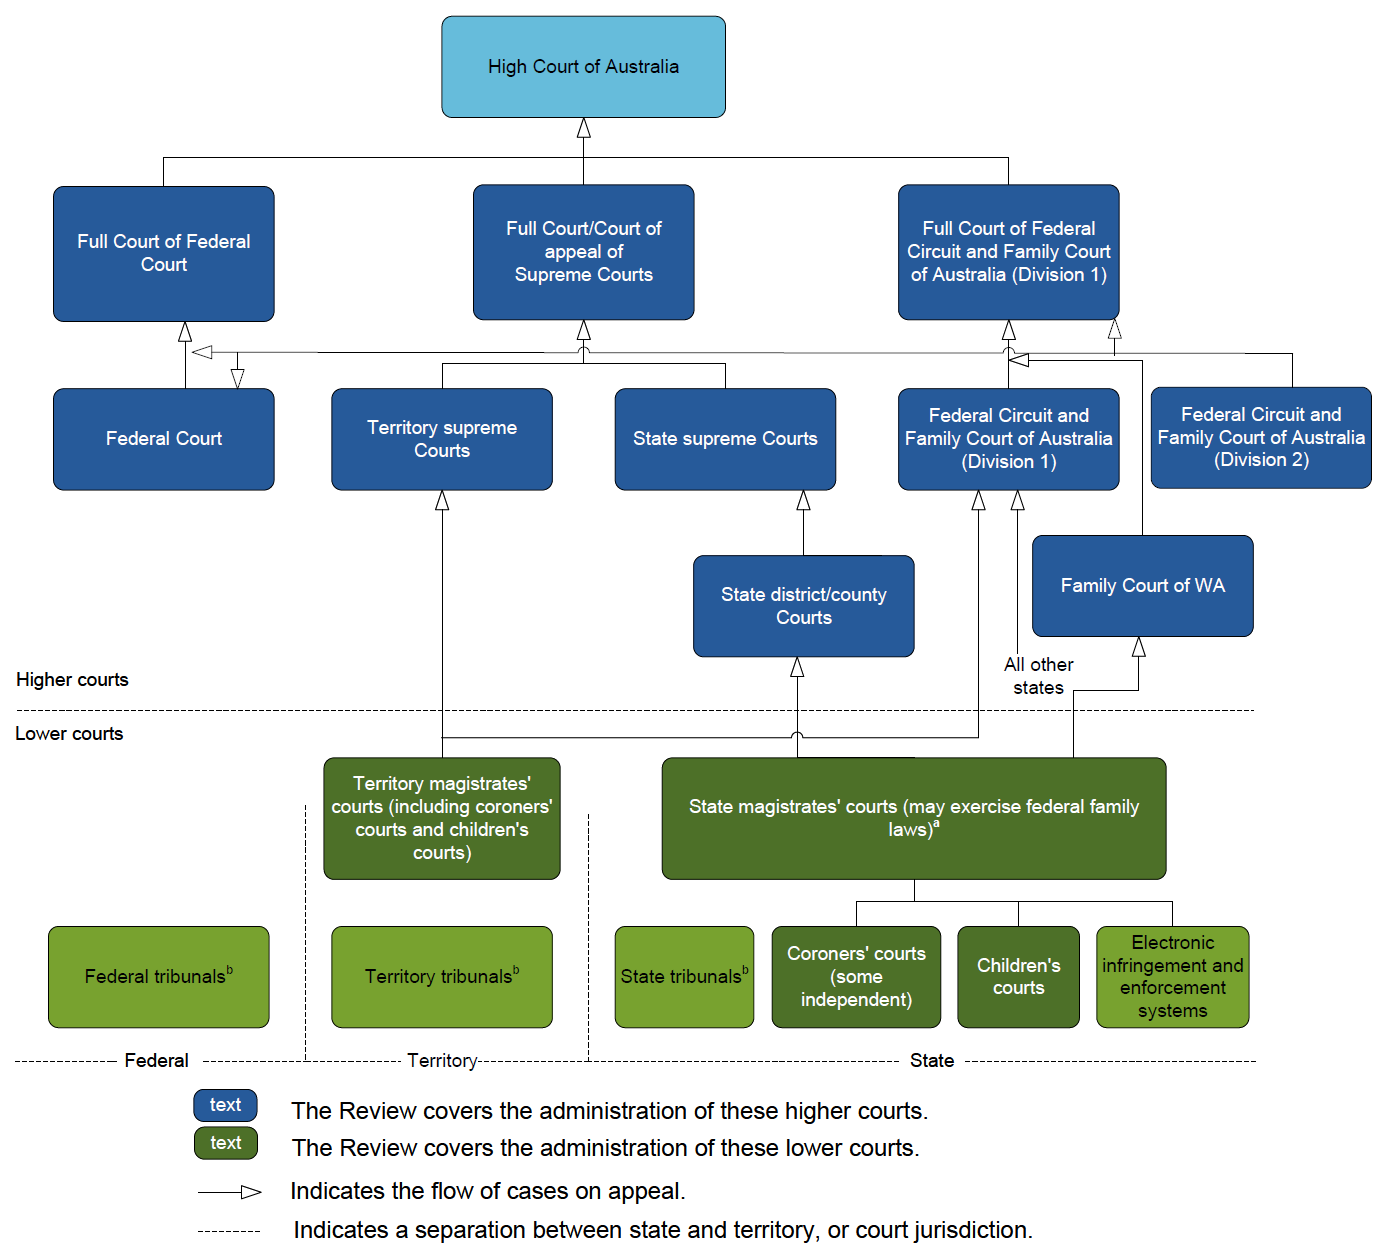 Figure 7.1 – Diagram showing an overview of the major relationships of courts in Australia. The diagram depicts higher and lower courts and the flow of cases on appeal. More details can be found within the text surrounding this image.